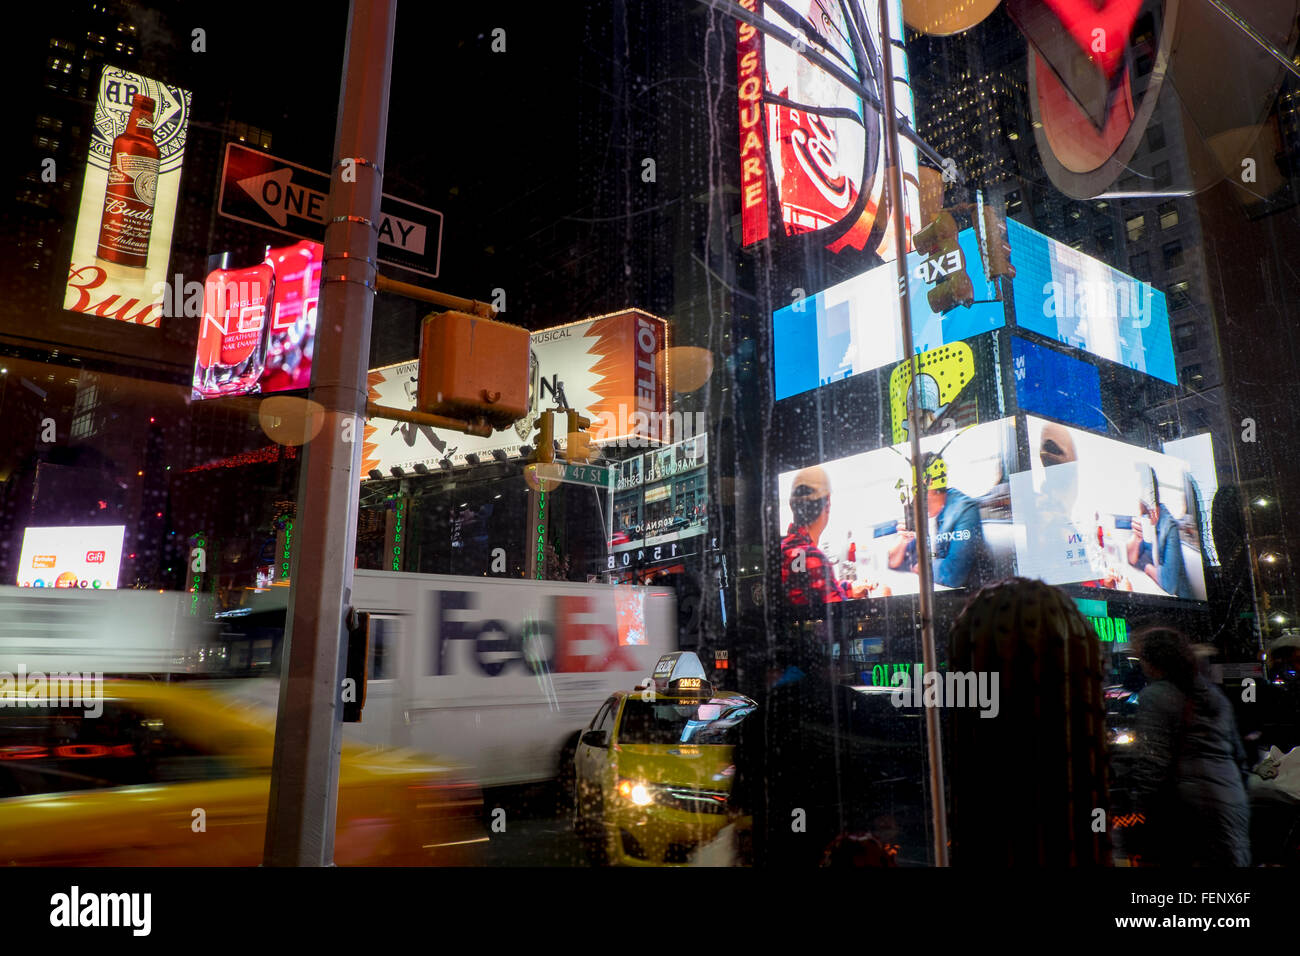 Advertising billboards at night, Times Square, New York, USA Stock Photo